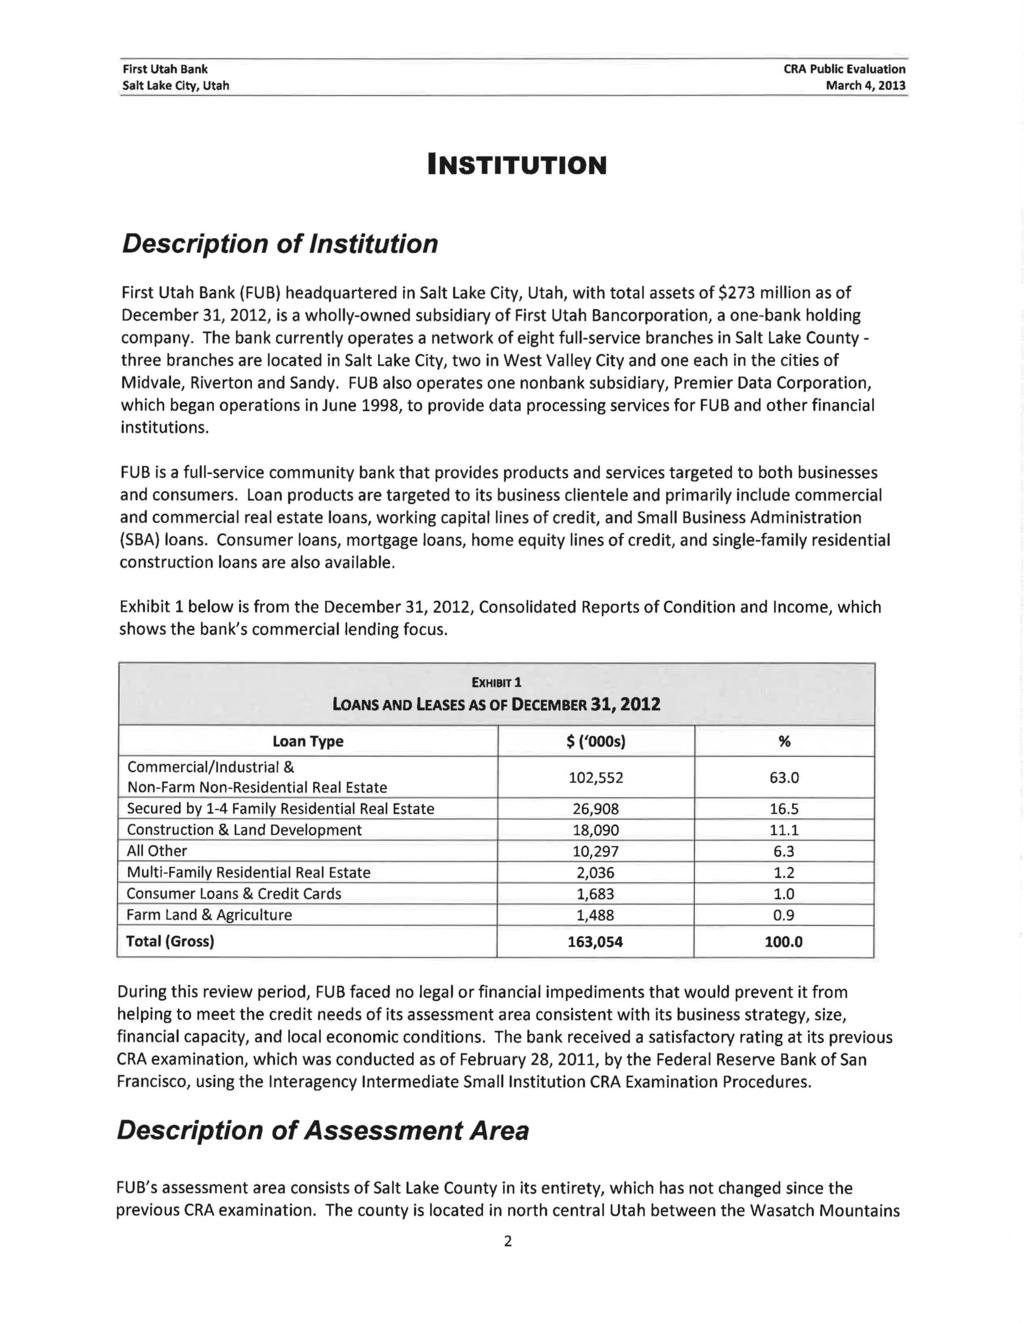 INSTITUTION Description of Institution First Utah Bank (FUB) headquartered in, with total assets of $273 million as of December 31, 2012, is a wholly-owned subsidiary of First Utah Bancorporation, a